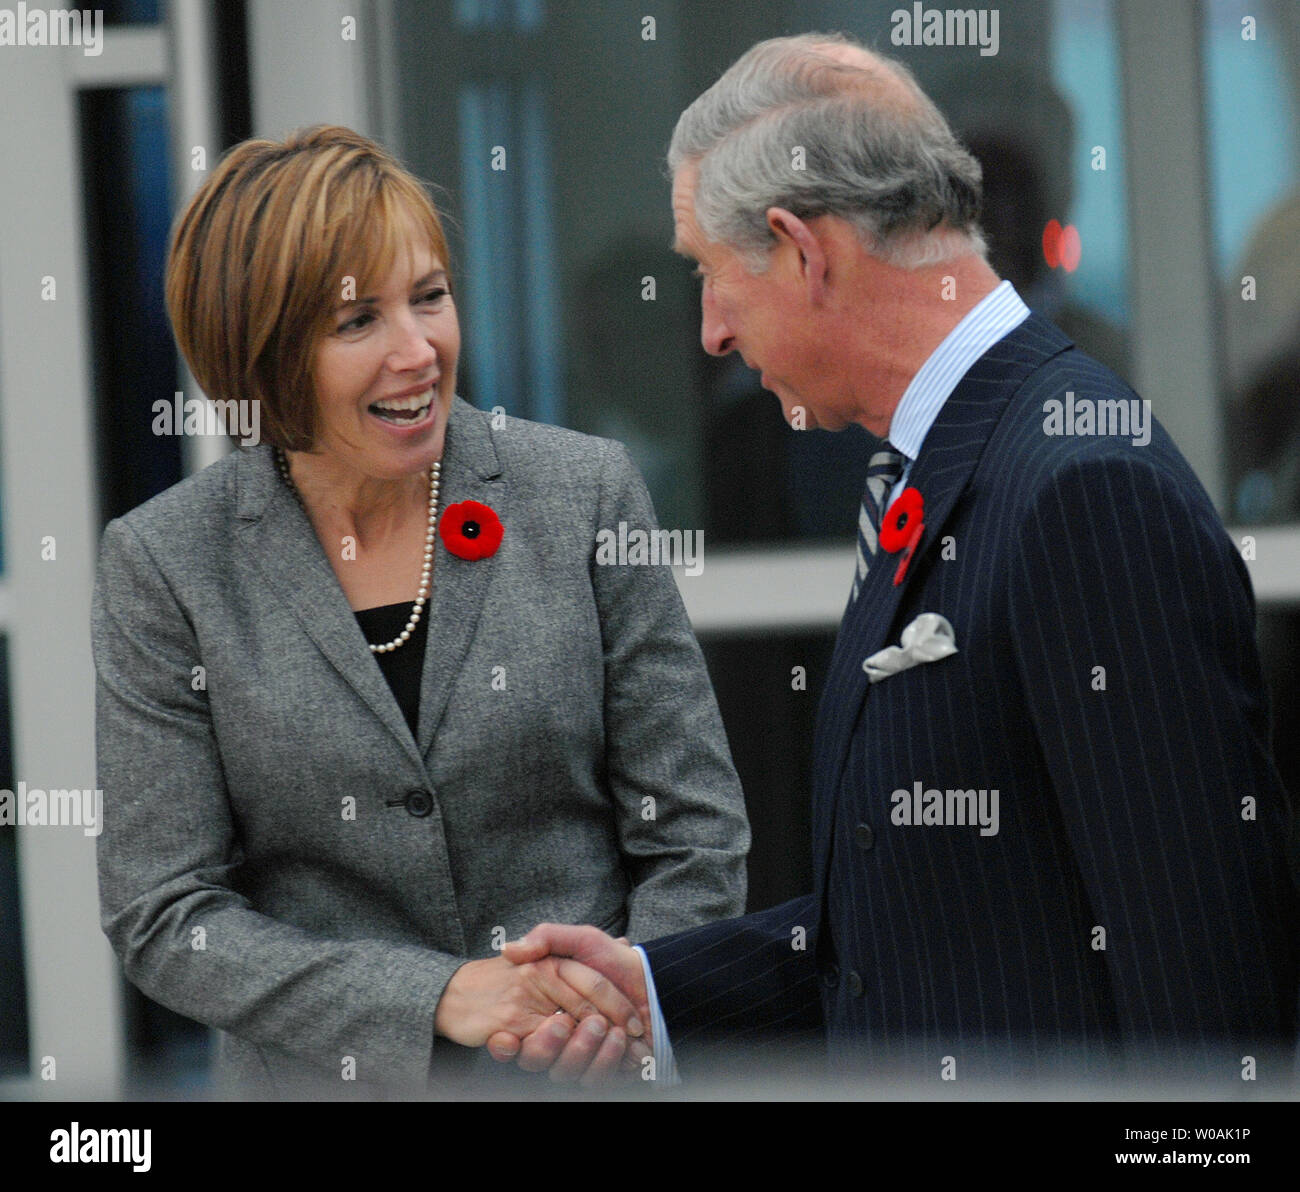 Britain's Prince Charles (R) shakes hands with Terri McGuinty, wife of Ontario premier Dalton McGuinty, at Pearson International Airport in Toronto, Canada on November 4, 2009.  The Prince and his wife Camilla, Duchess of Cornwall, arrived in Toronto today as part of their 11-day tour of Canada.  UPI /Christine Chew Stock Photo